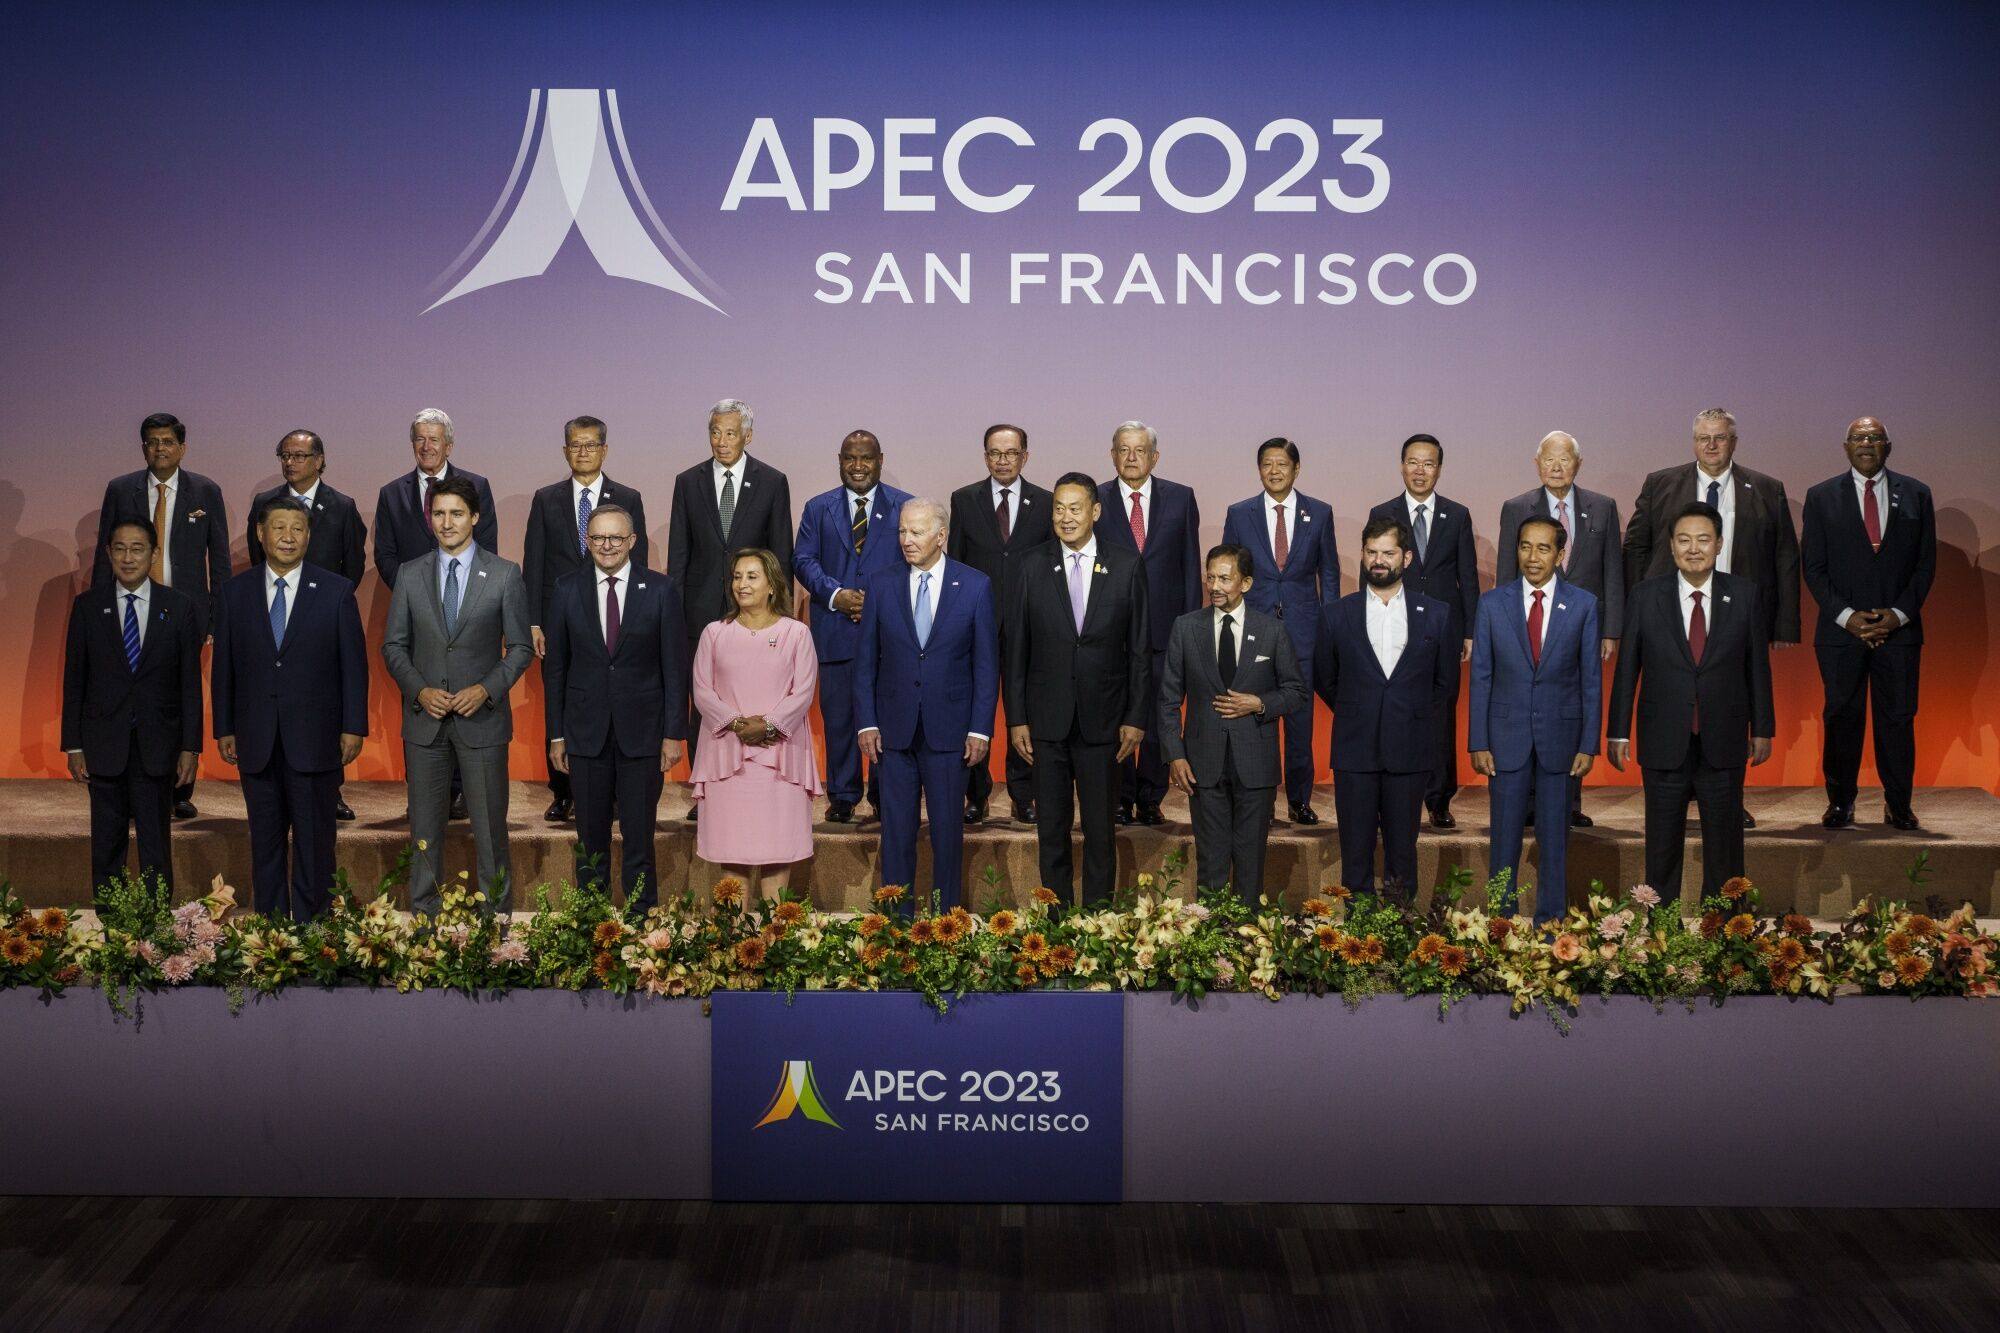 World leaders gather for a group photograph at the Asia-Pacific Economic Cooperation summit in San Francisco. Photo: Bloomberg